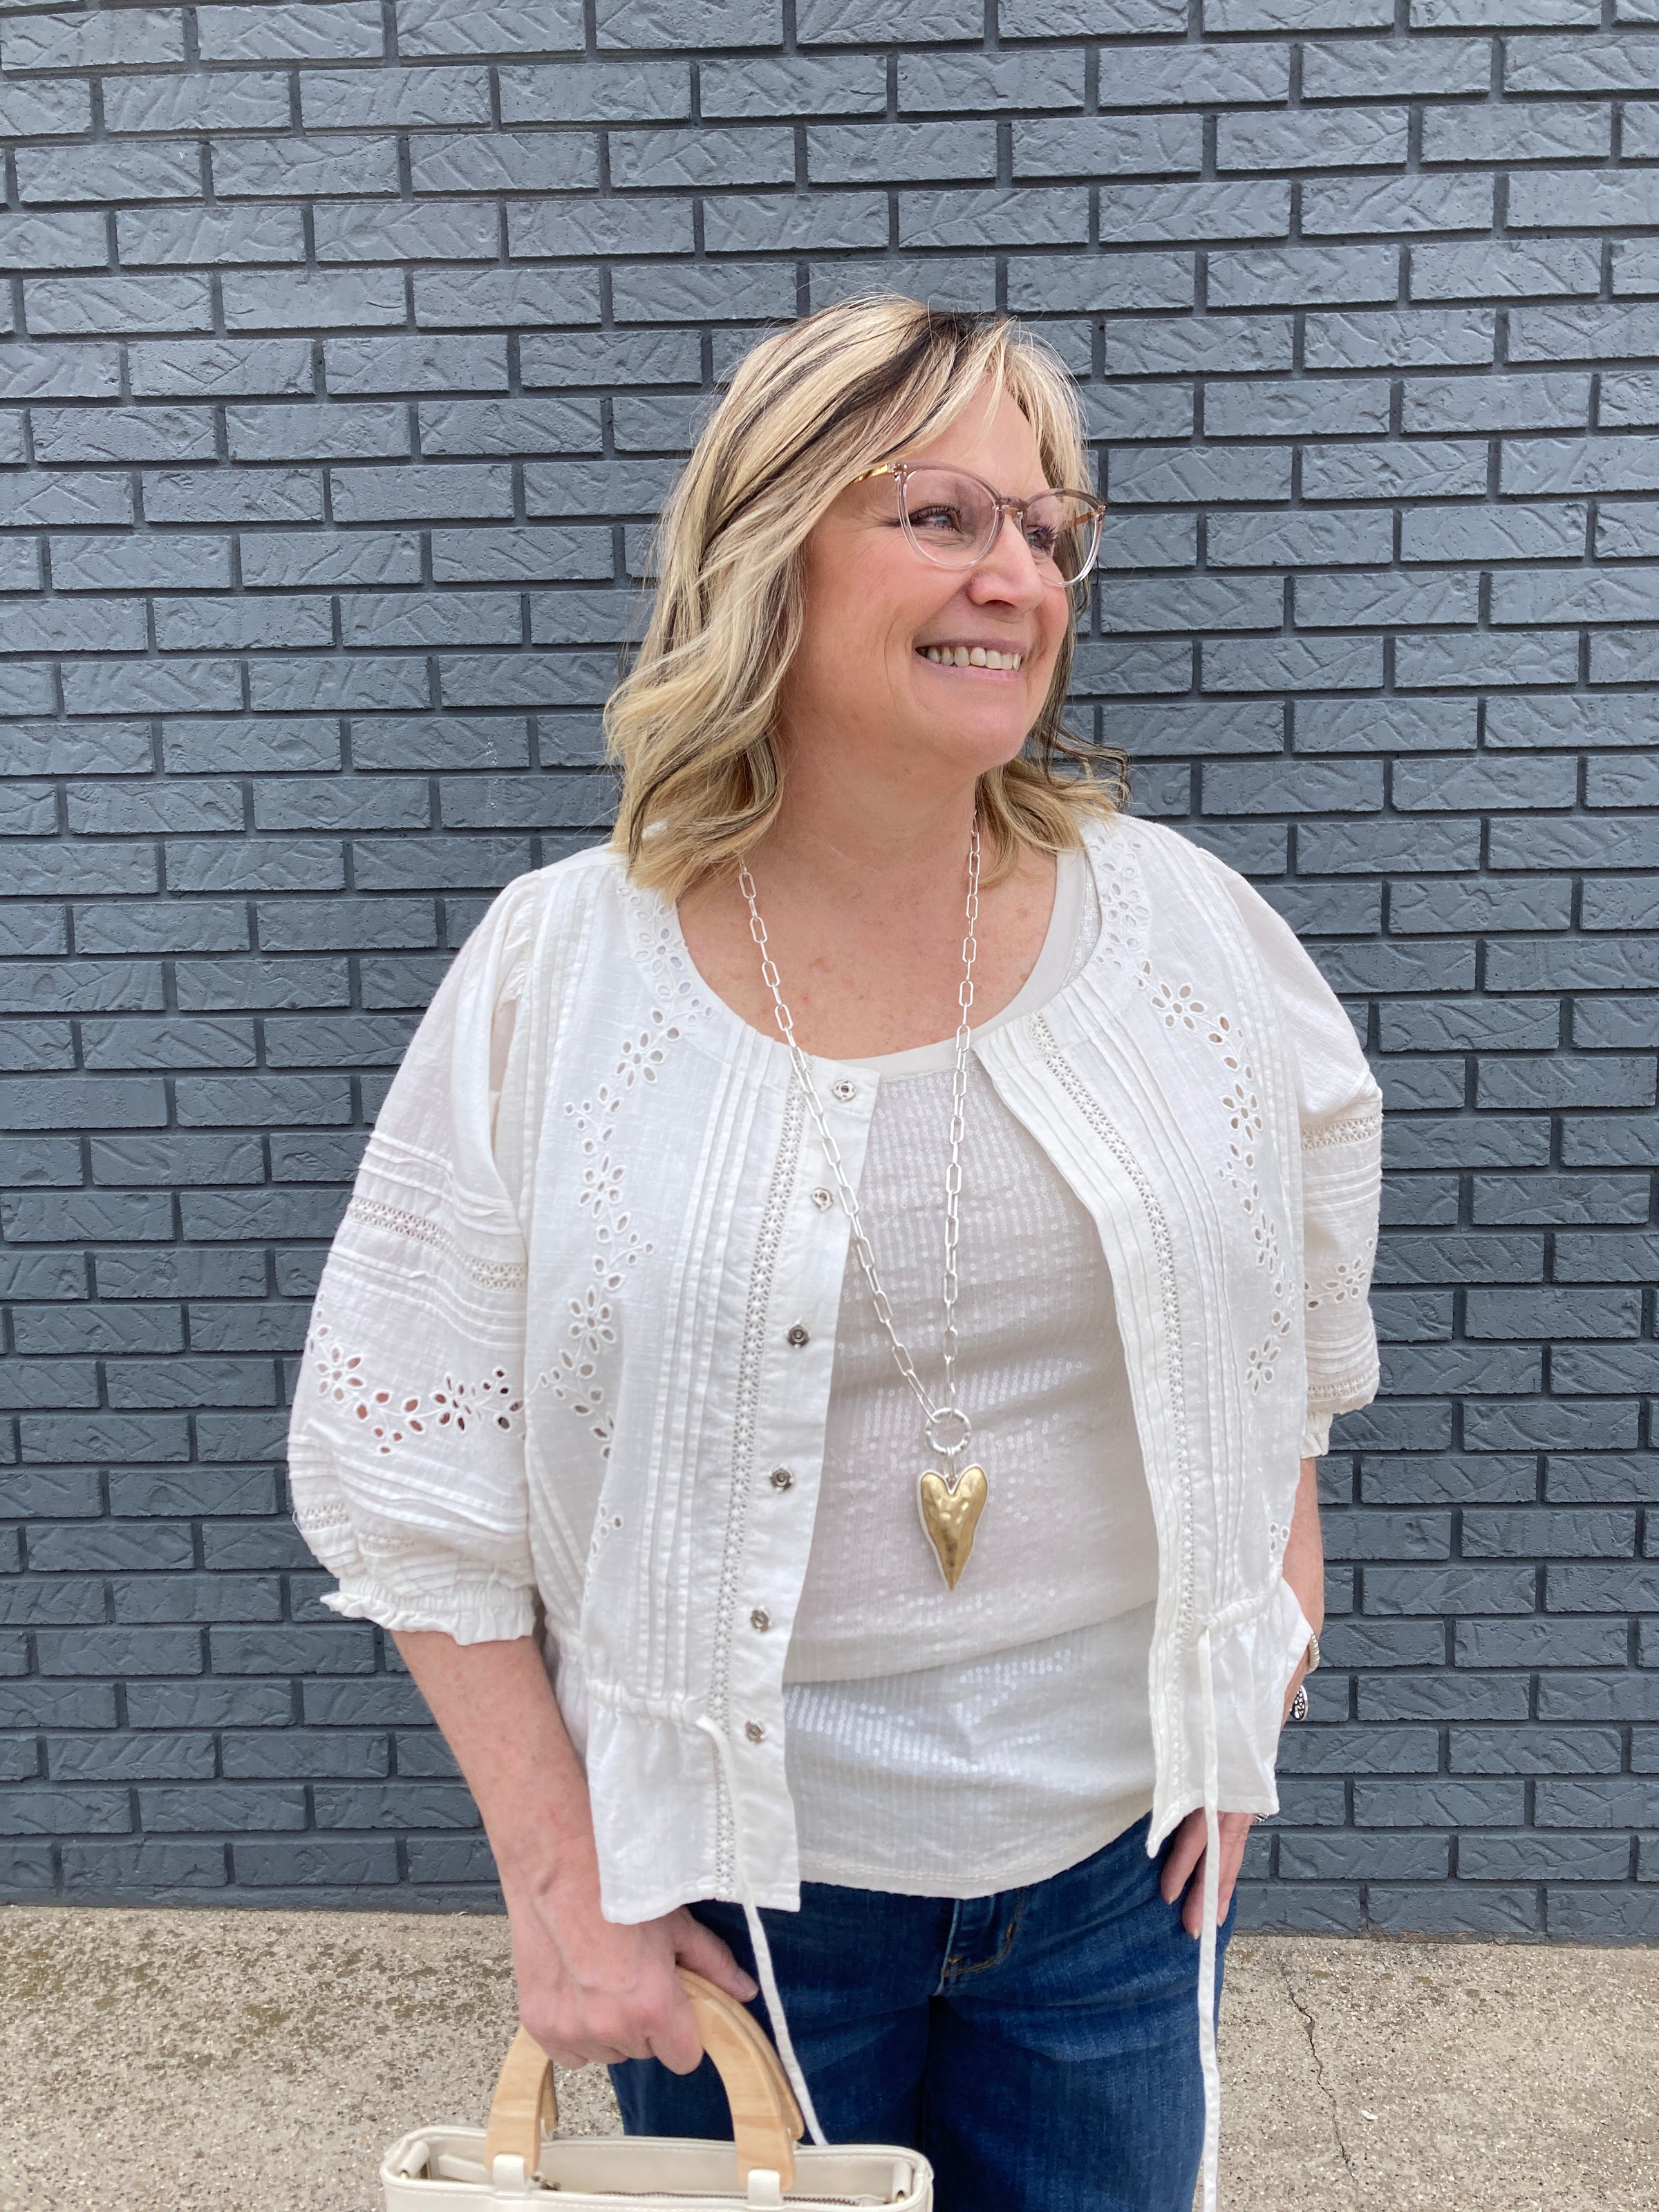 A blonde professional woman in her 50's wearing a chic white peasant blouse as a shacket over a white tank top. She is also wearing blue jeans and a gold heart necklace in Cadillac Michigan